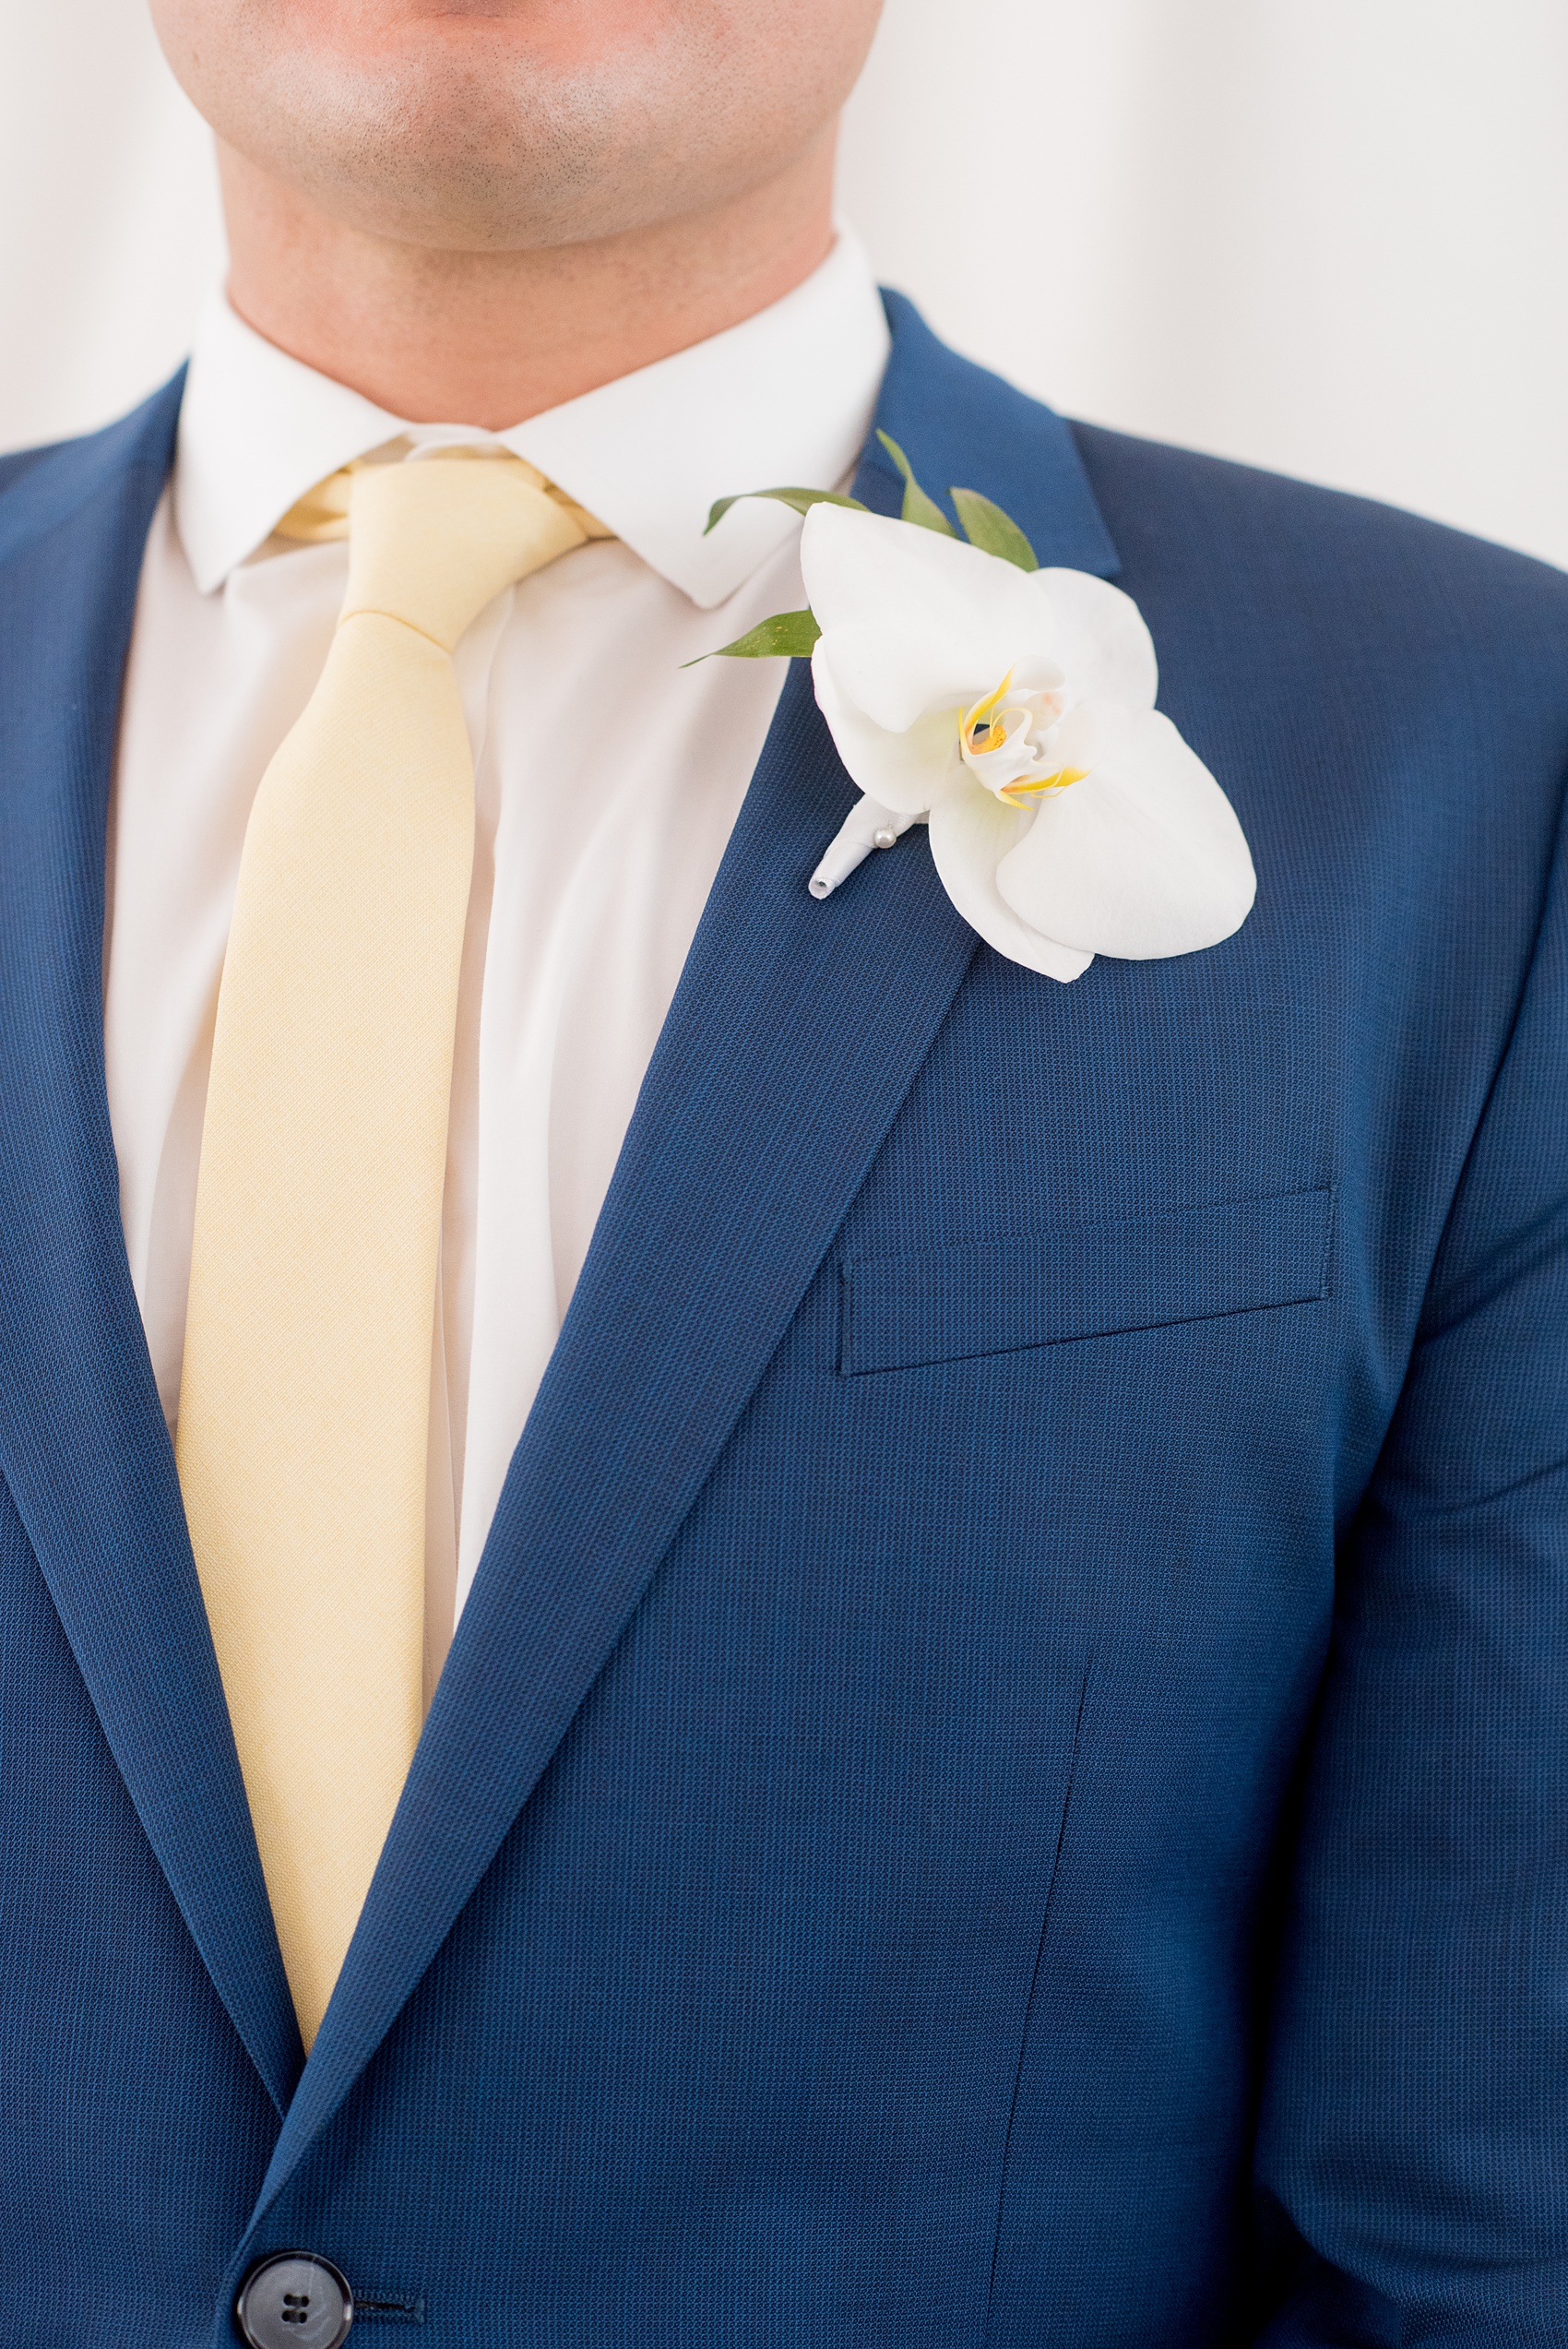 The Cookery Durham wedding photos by Mikkel Paige Photography. Picture of the groomsman's blue suit, yellow tie and white orchid boutonniere by Tre Bella.